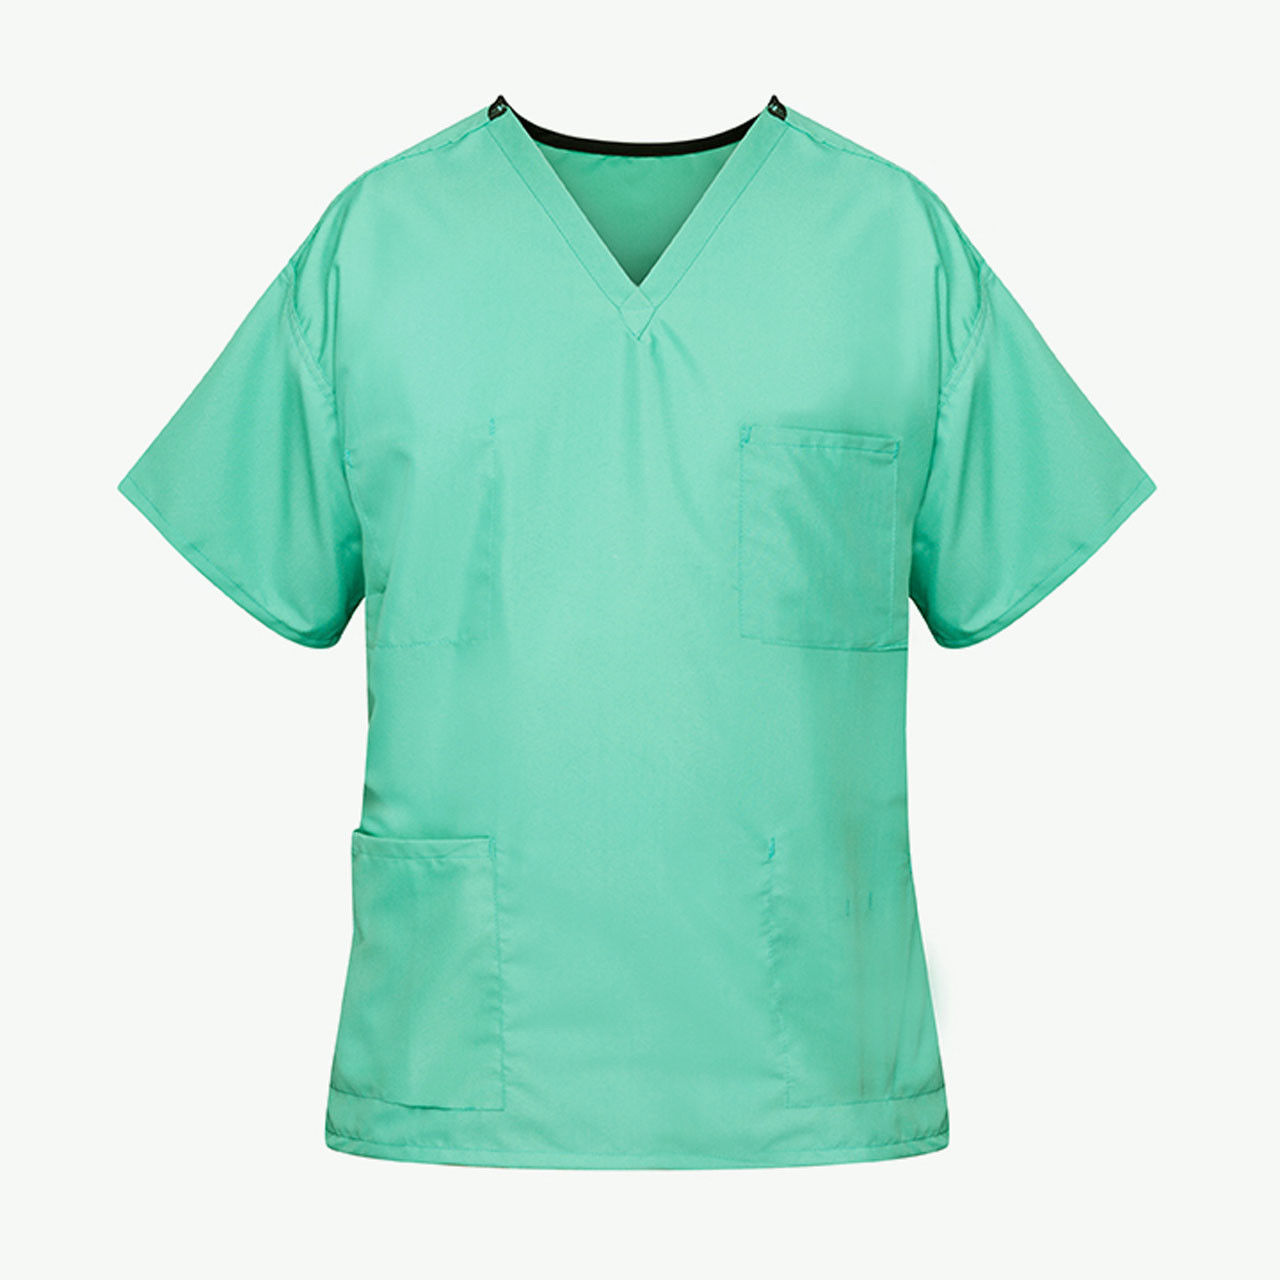 How does the reversible styling benefit the jade green scrubs?